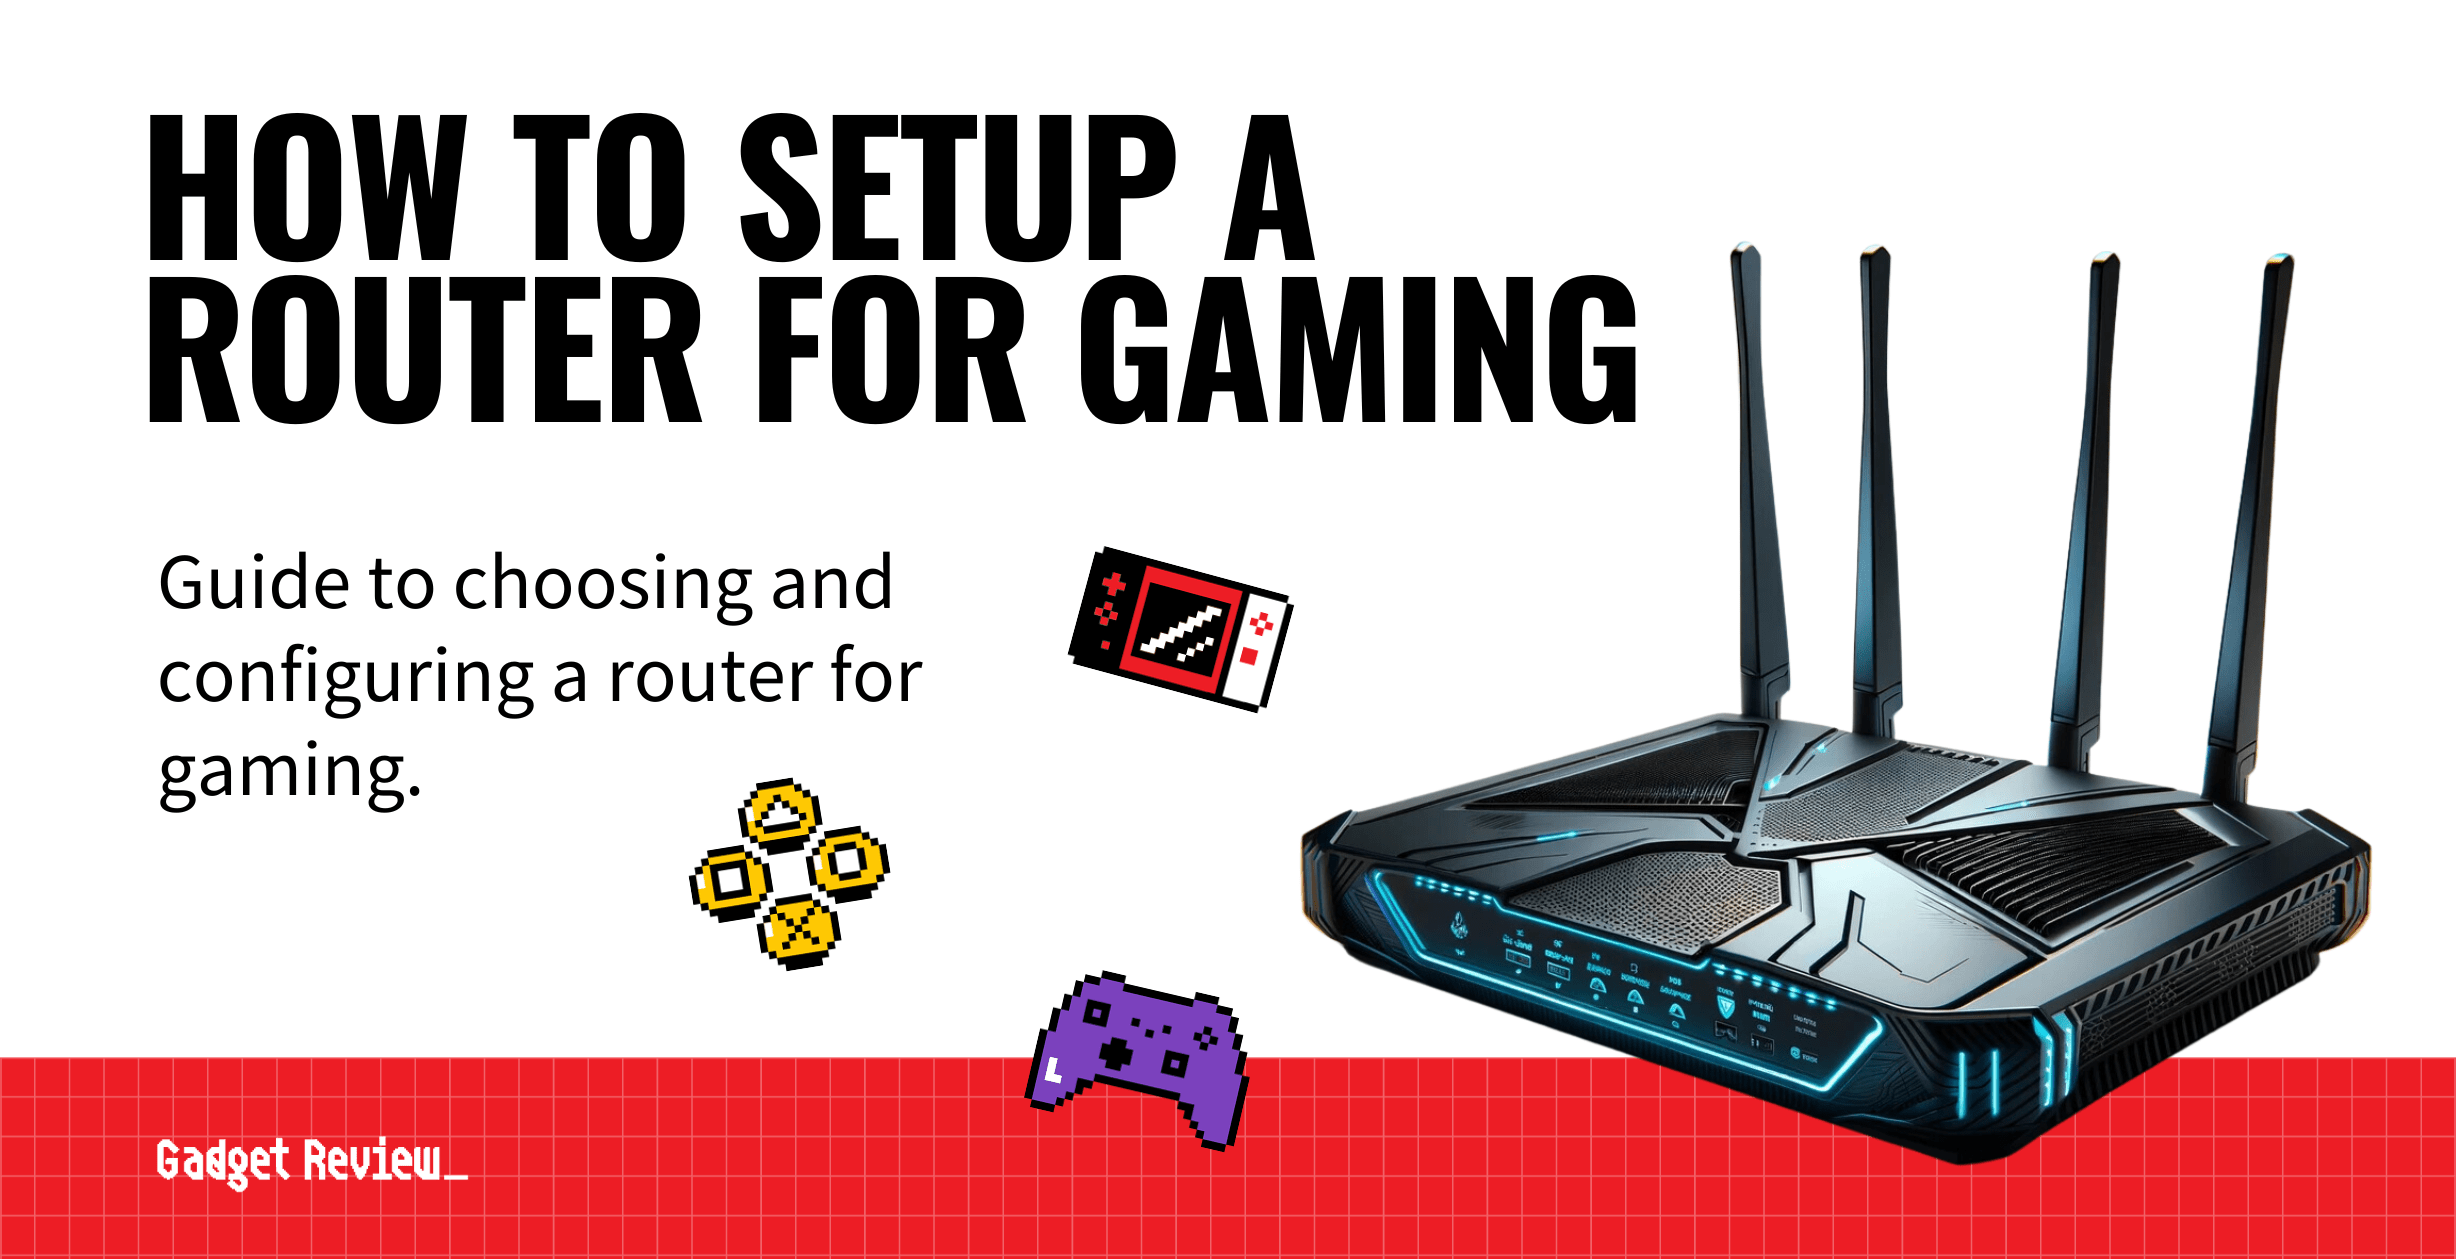 How to Setup a Router for Gaming